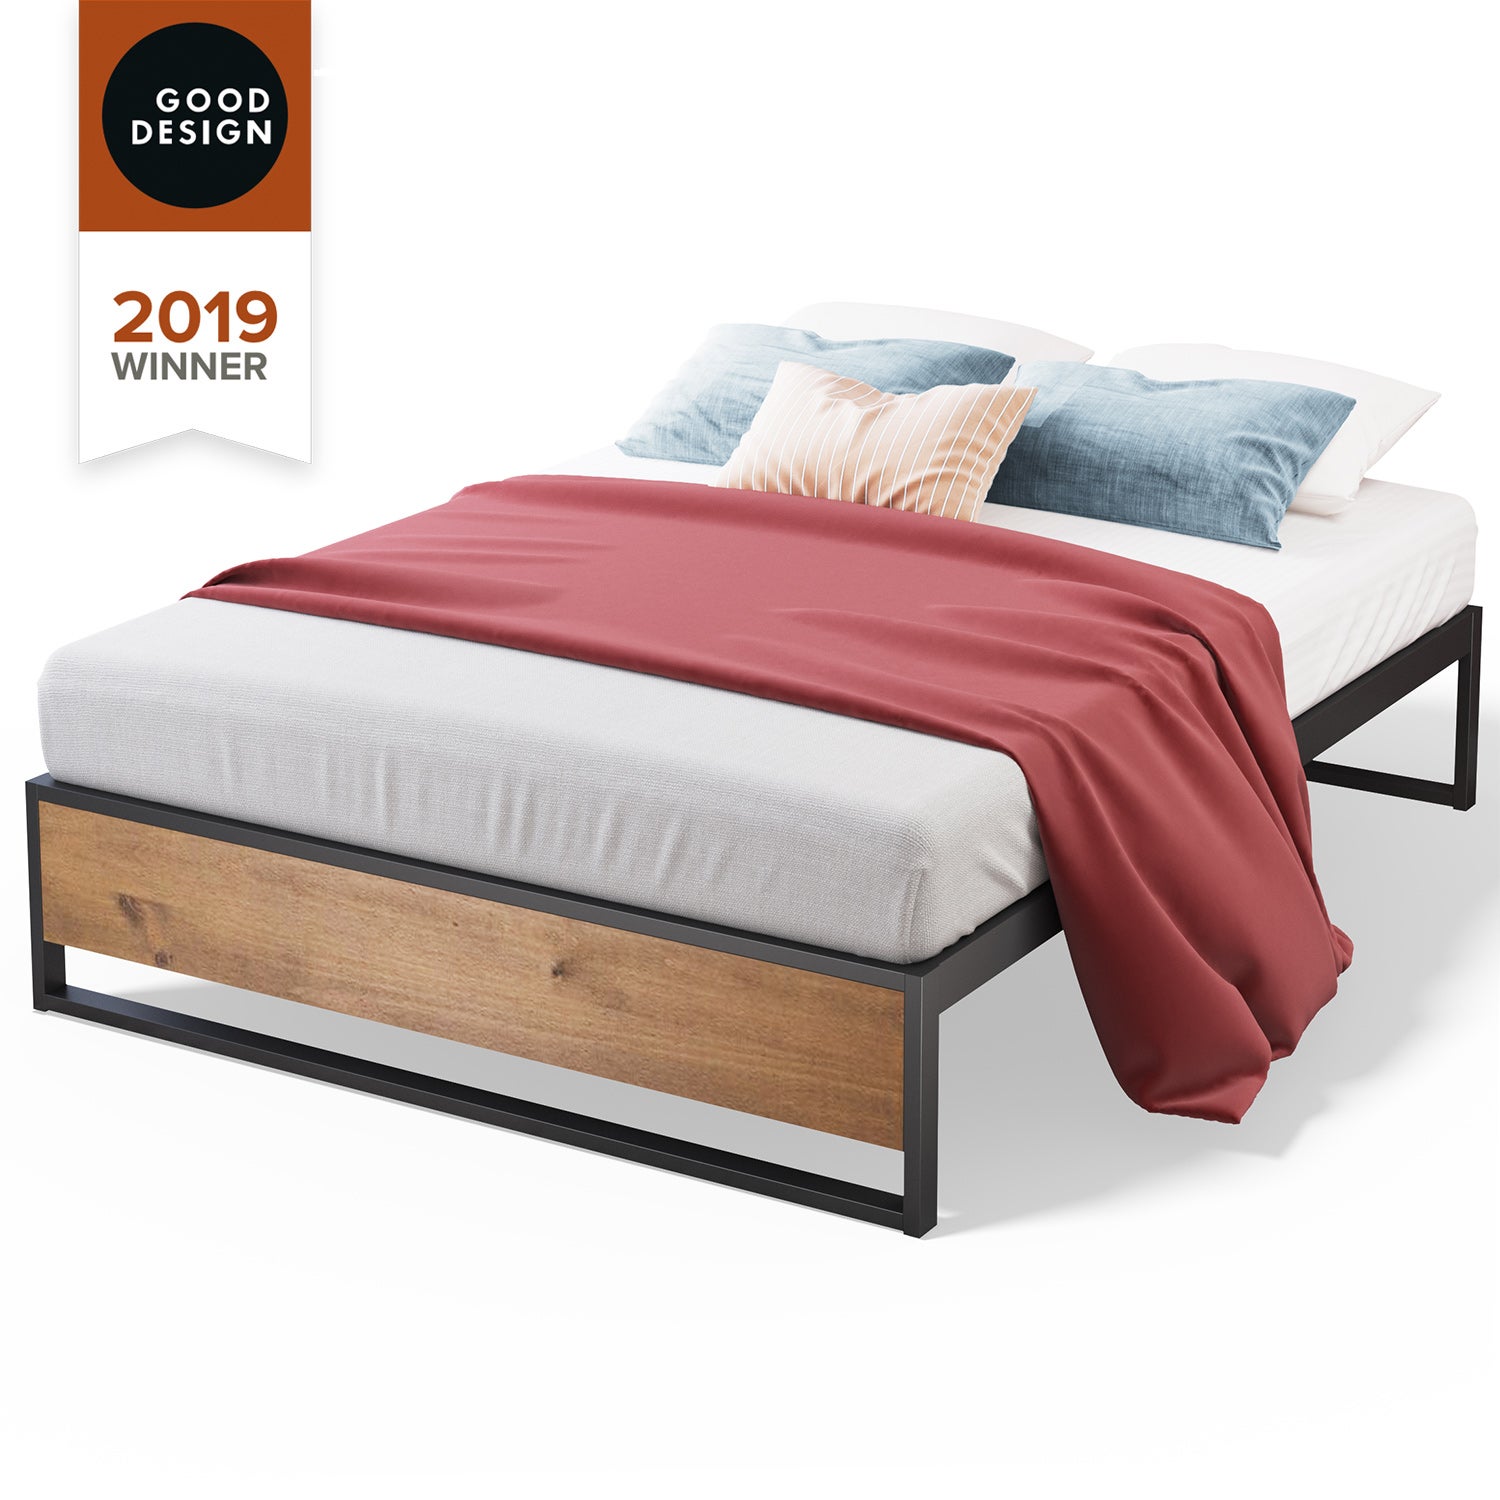 Zinus High Metal and Solid Wood Bed Base 35cm Underbed storage - Single, Double, Queen & King